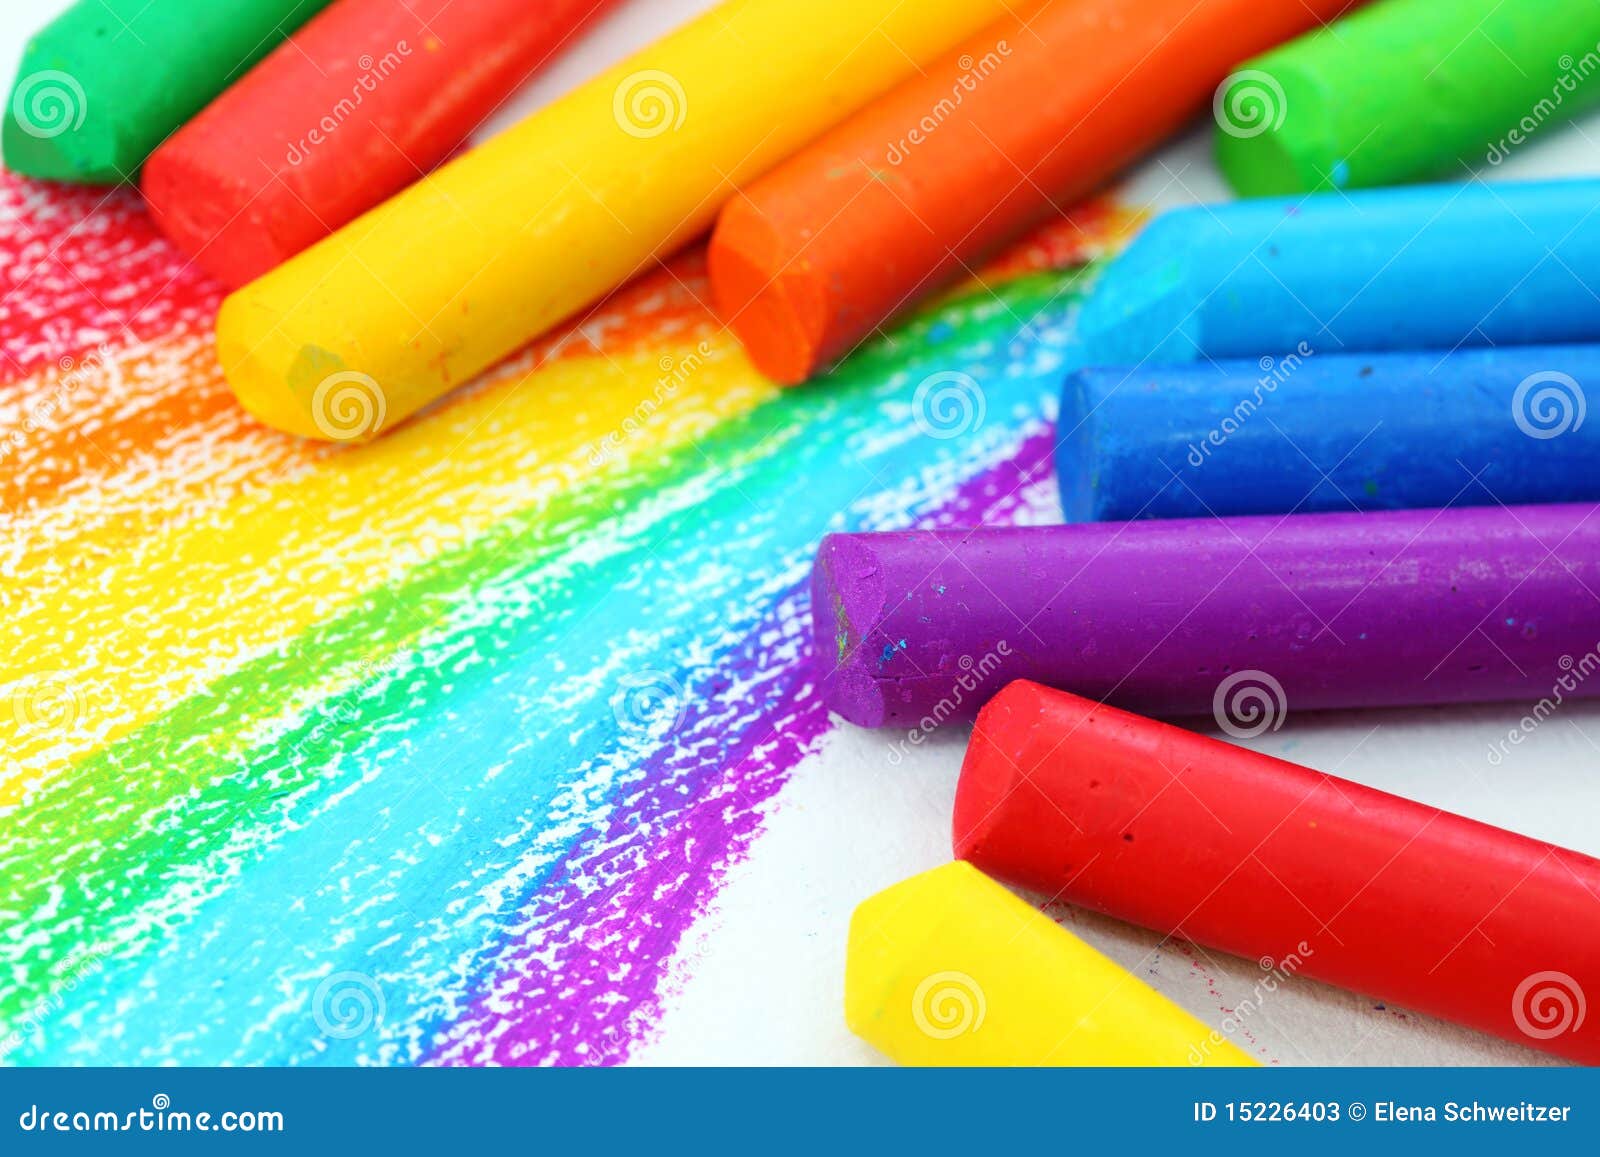 Box of oil pastel crayons stock photo. Image of concentration